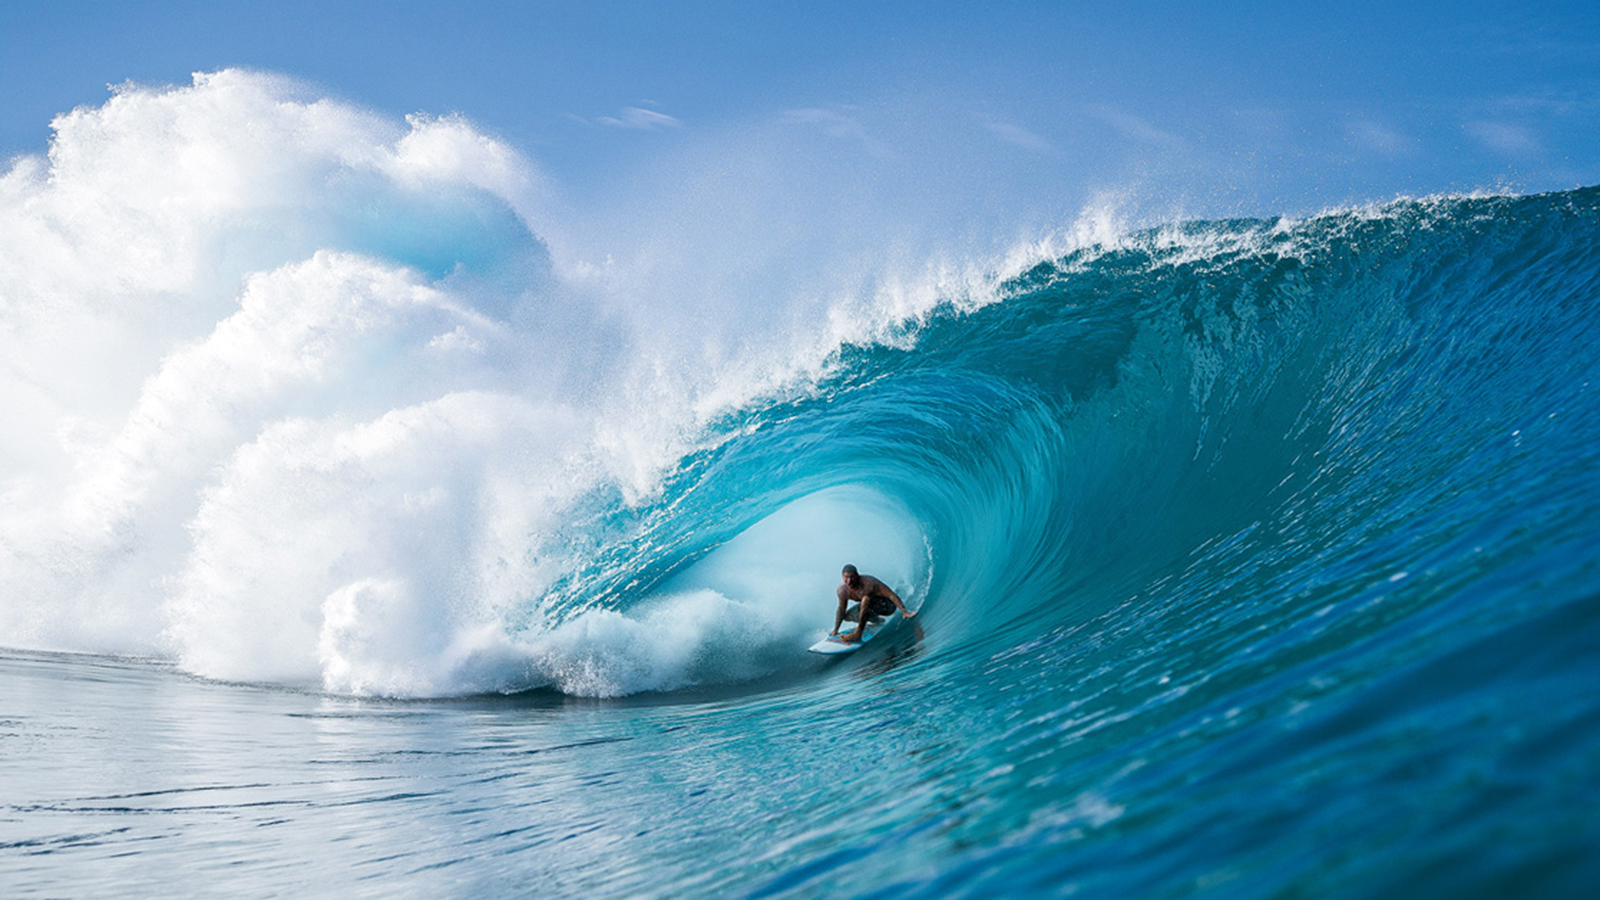  A surfer rides a large wave in the ocean.